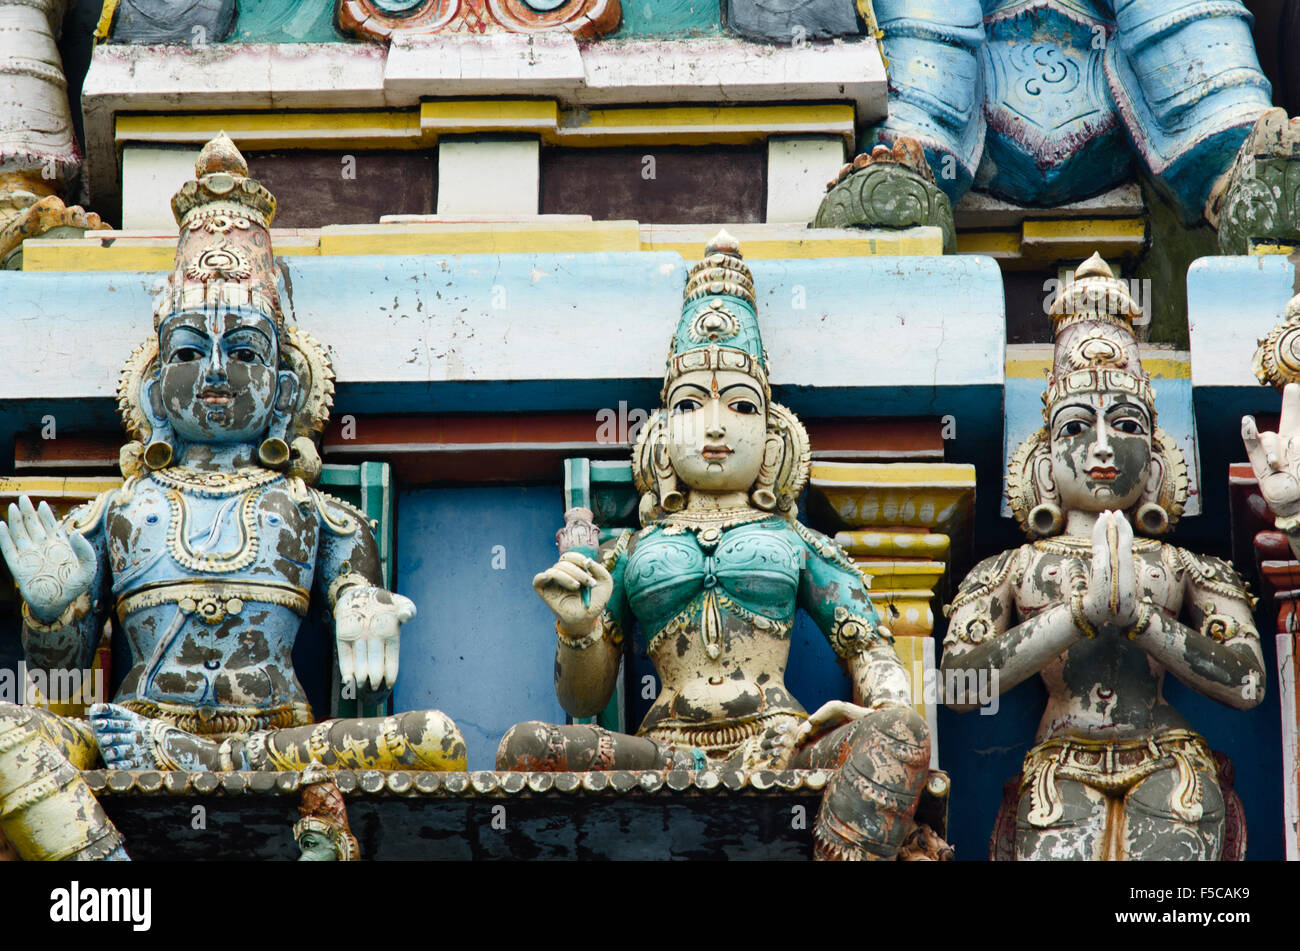 Intricate carvings of Hindu Gods and Goddesses on the facade of a Hindu temple in Chennai, Madras, Tamil Nadu, India, Asia Stock Photo